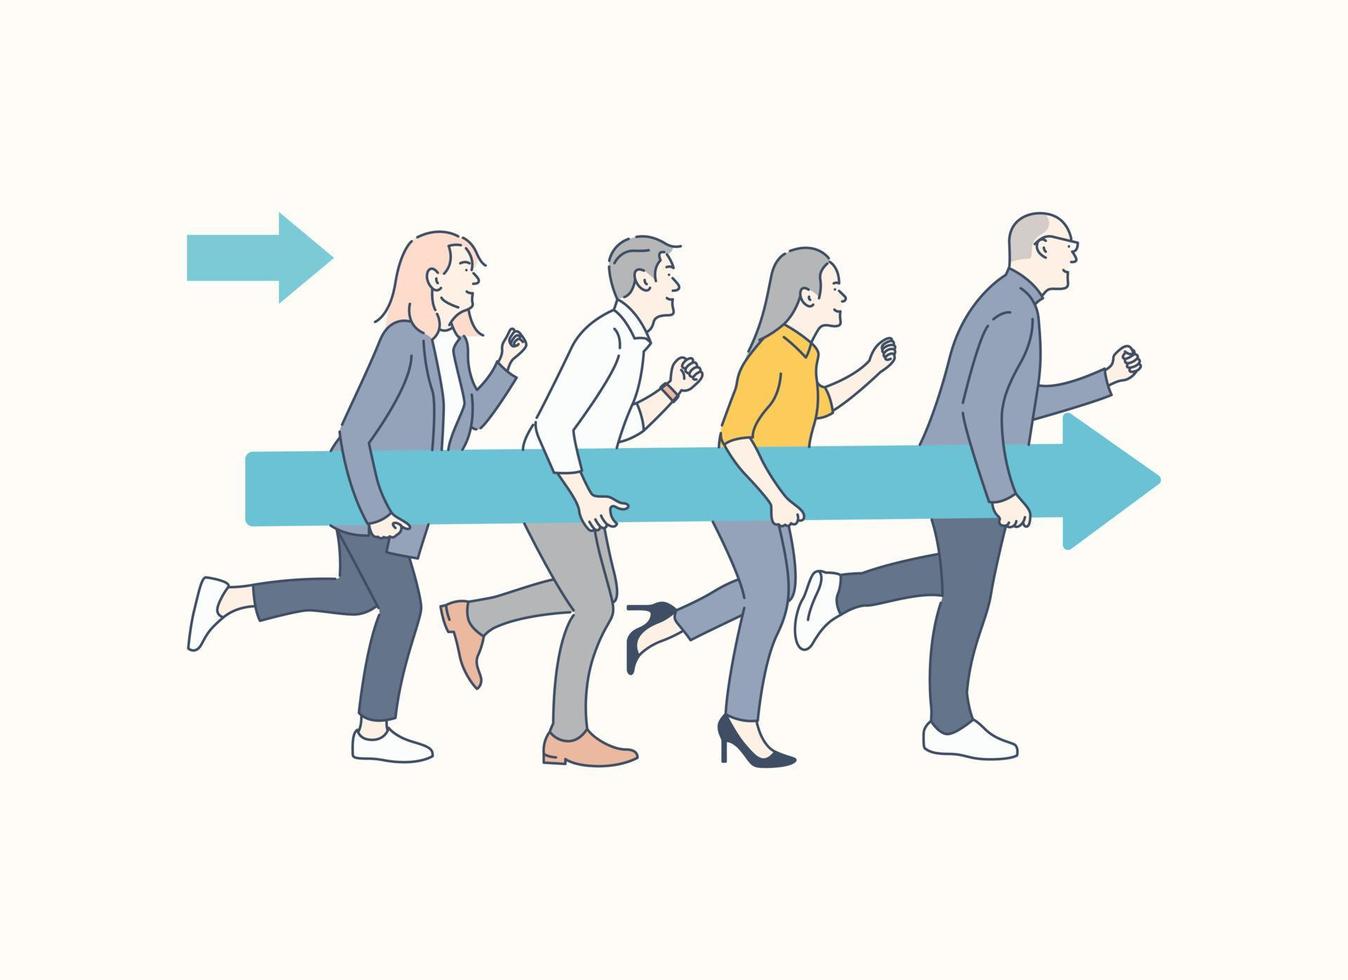 Business team running in the right direction, hand drawn style vector design illustration